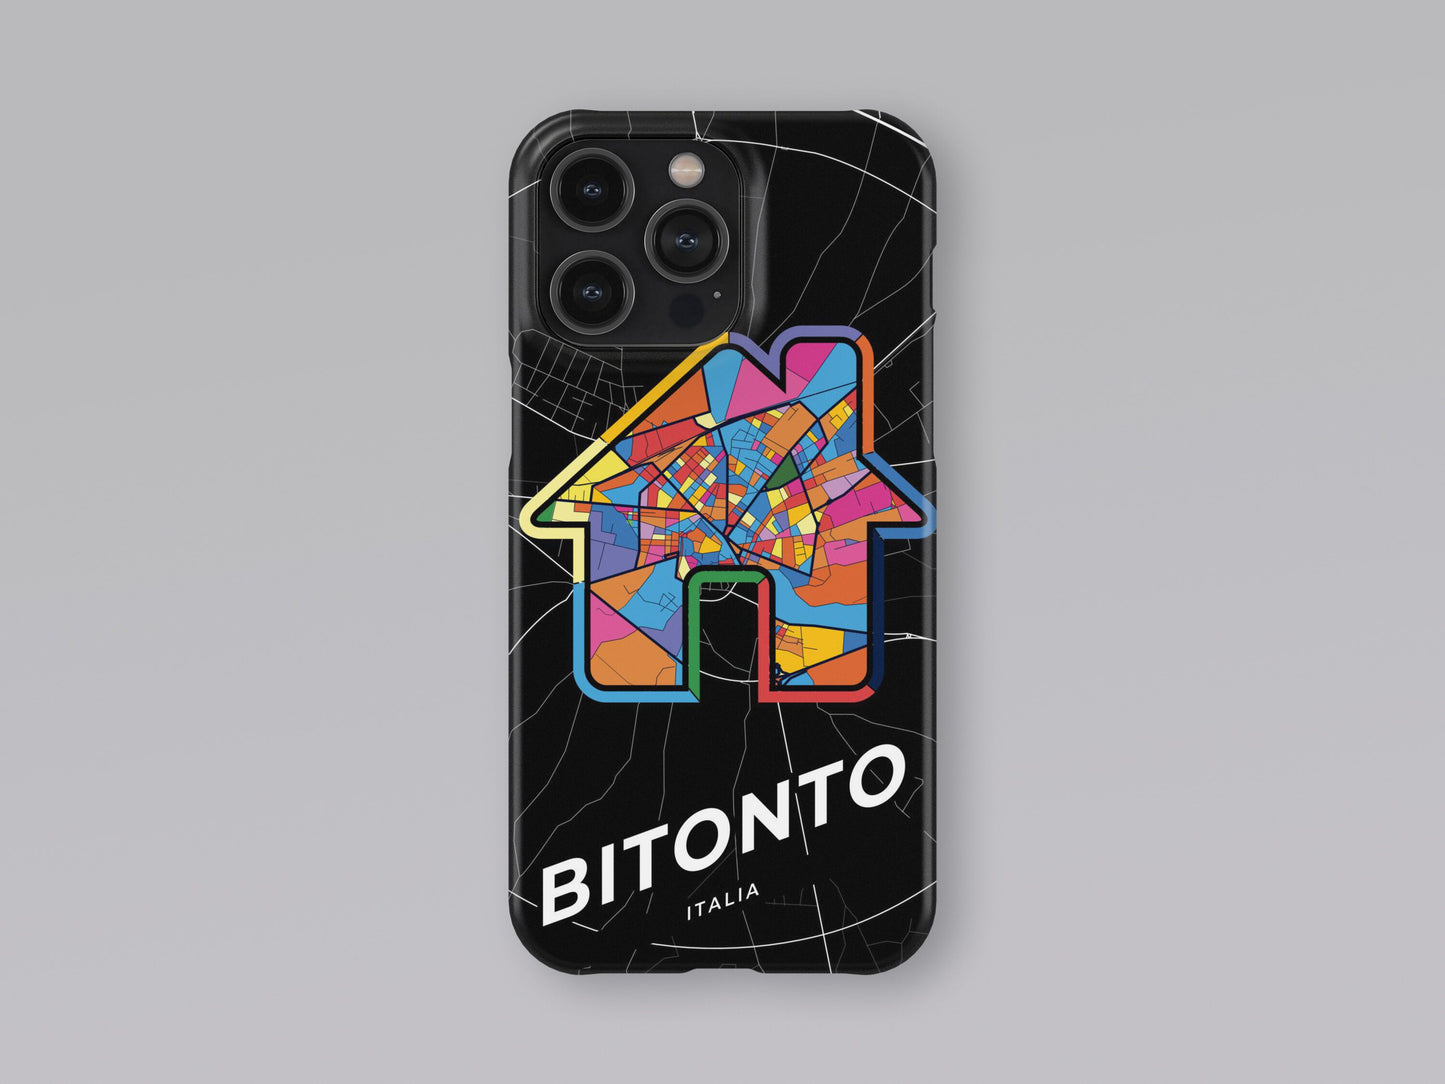 Bitonto Italy slim phone case with colorful icon. Birthday, wedding or housewarming gift. Couple match cases. 3